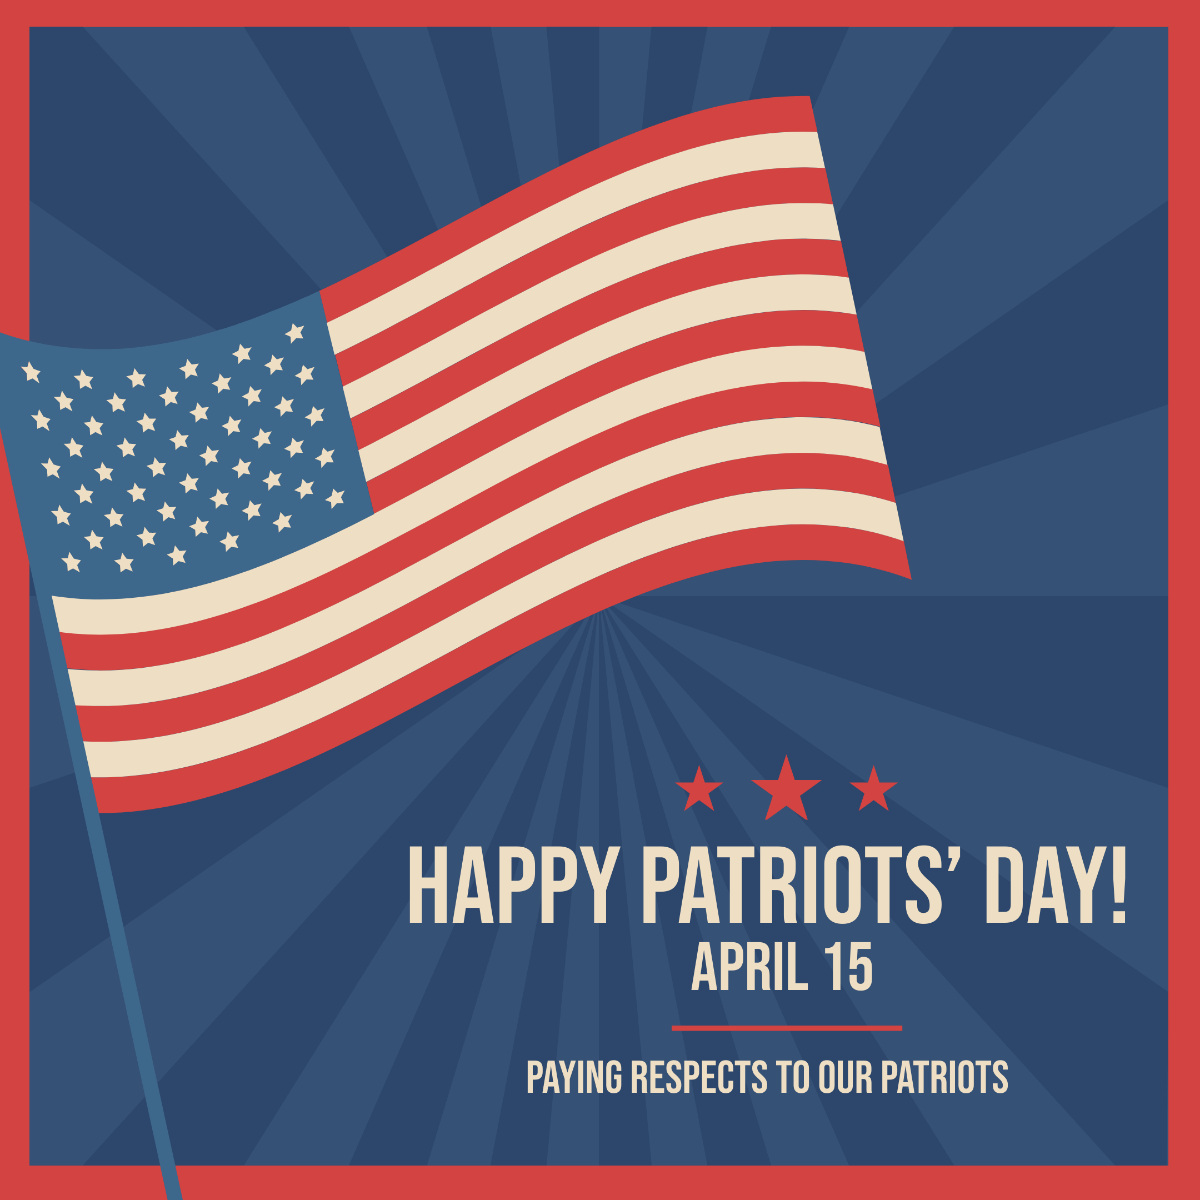 Free Patriots' Day Instagram Post Template